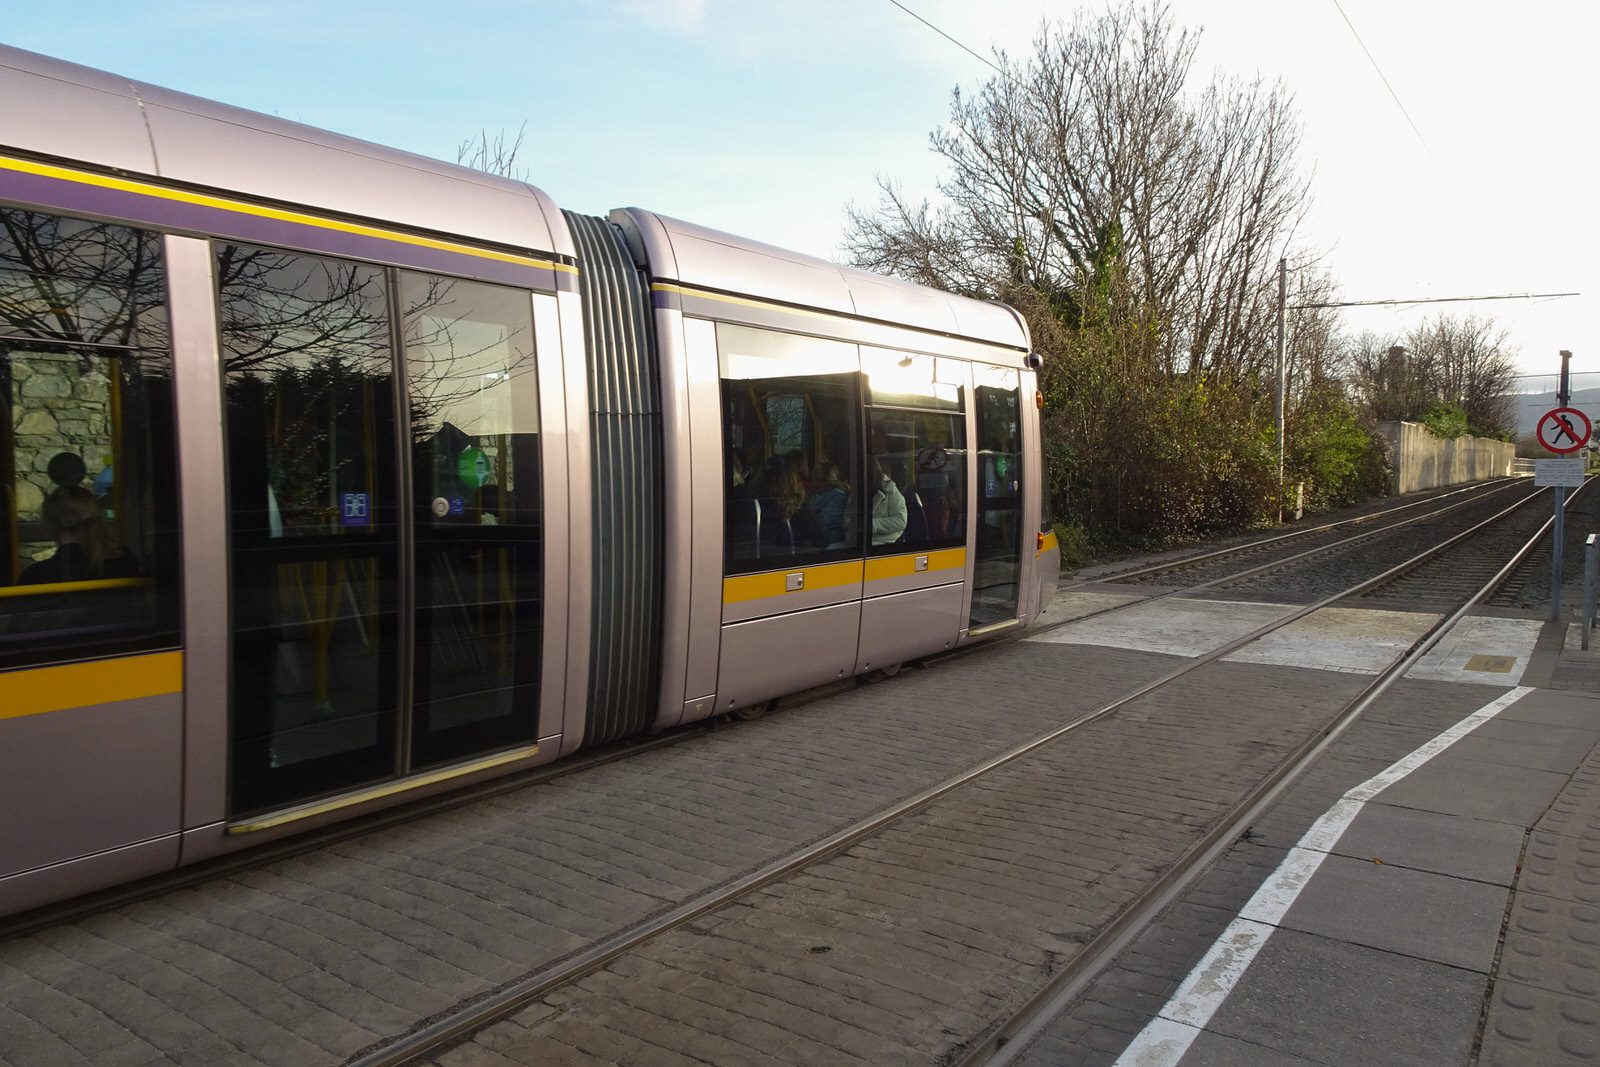 THE MILLTOWN LUAS TRAM STOP A FEW DAYS BEFORE CHRISTMAS DAY [AND NEARBY]-226268-1